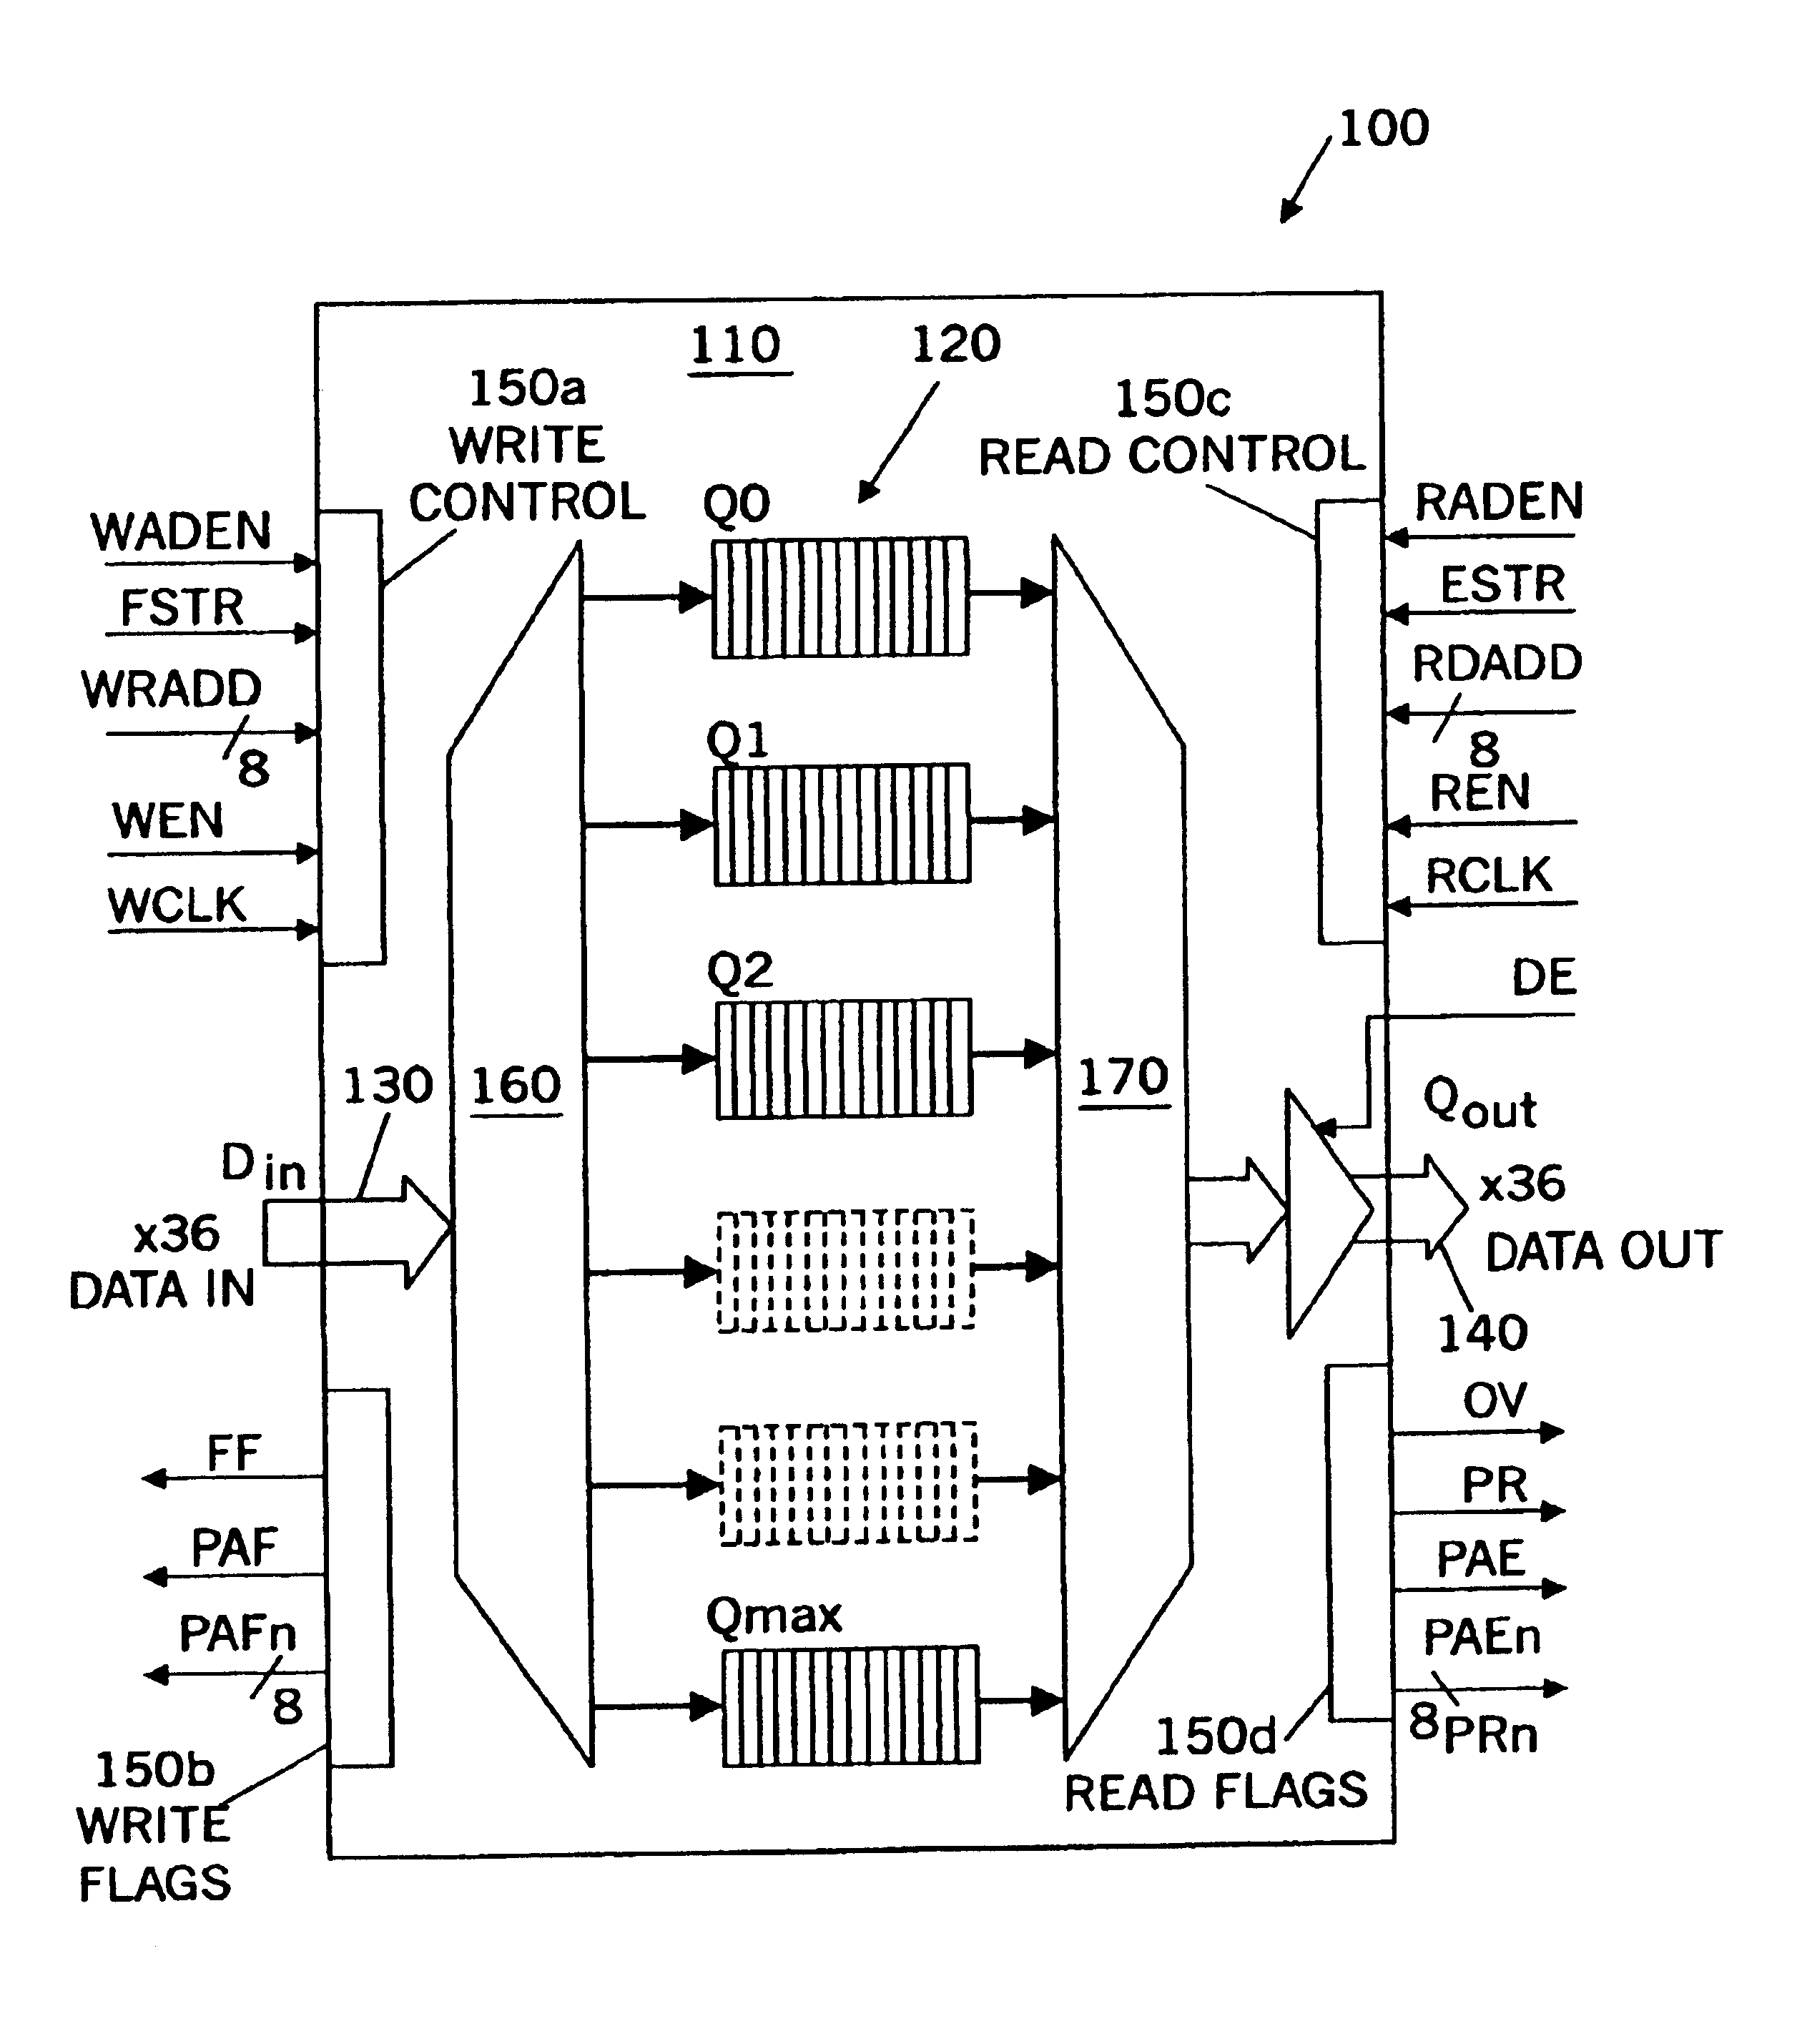 Integrated circuit FIFO memory devices that are divisible into independent FIFO queues, and systems and methods for controlling same